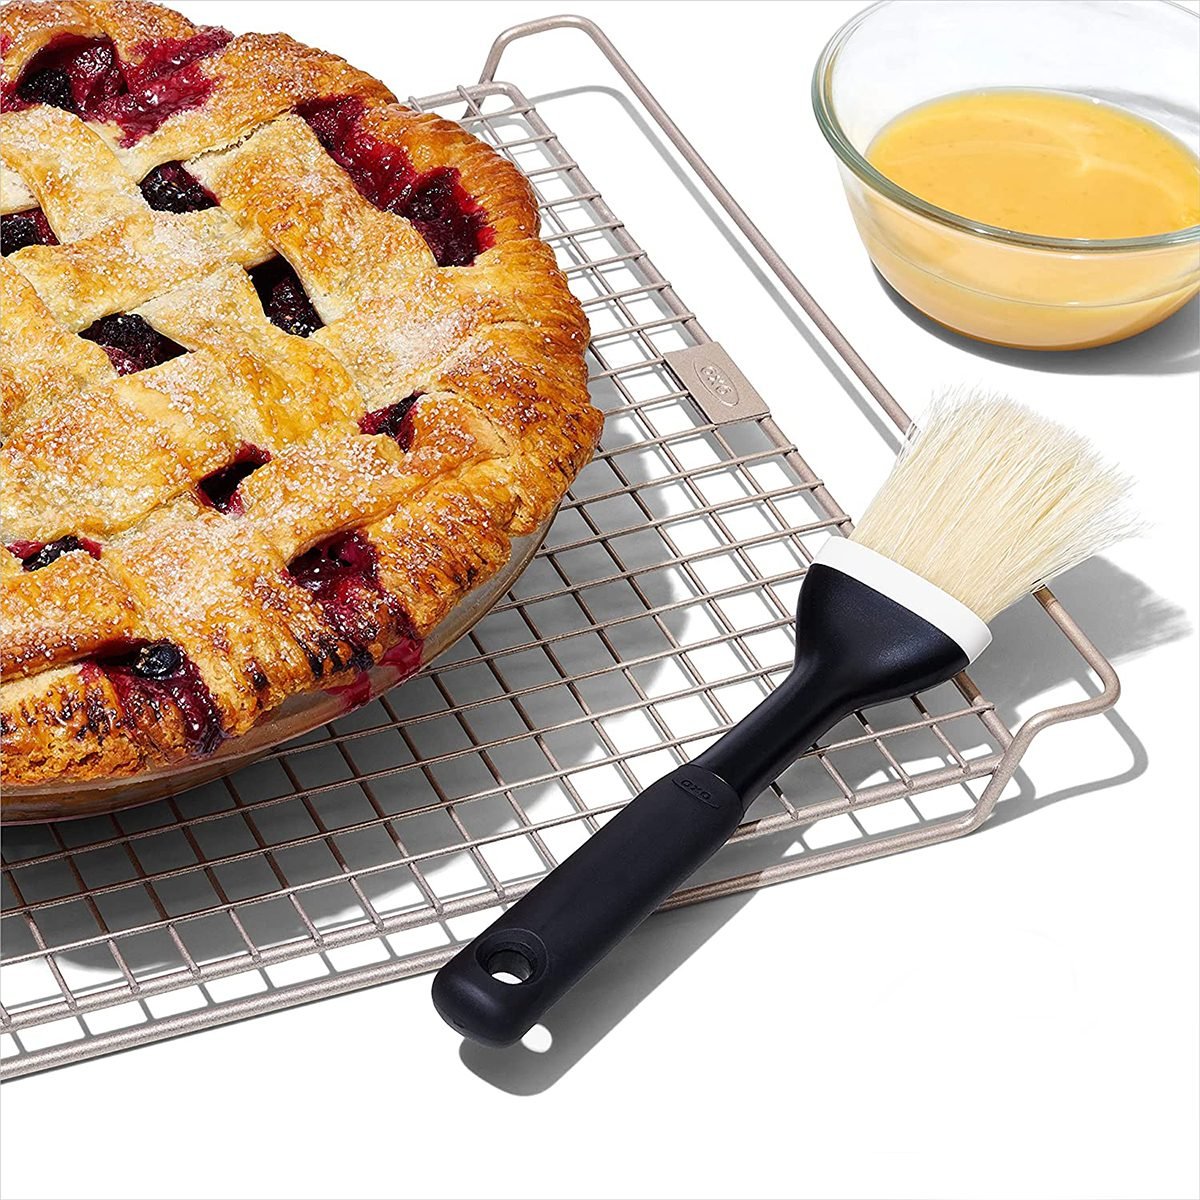 20 Pie-Baking Tools Every Home Cook Needs to Bake the Perfect